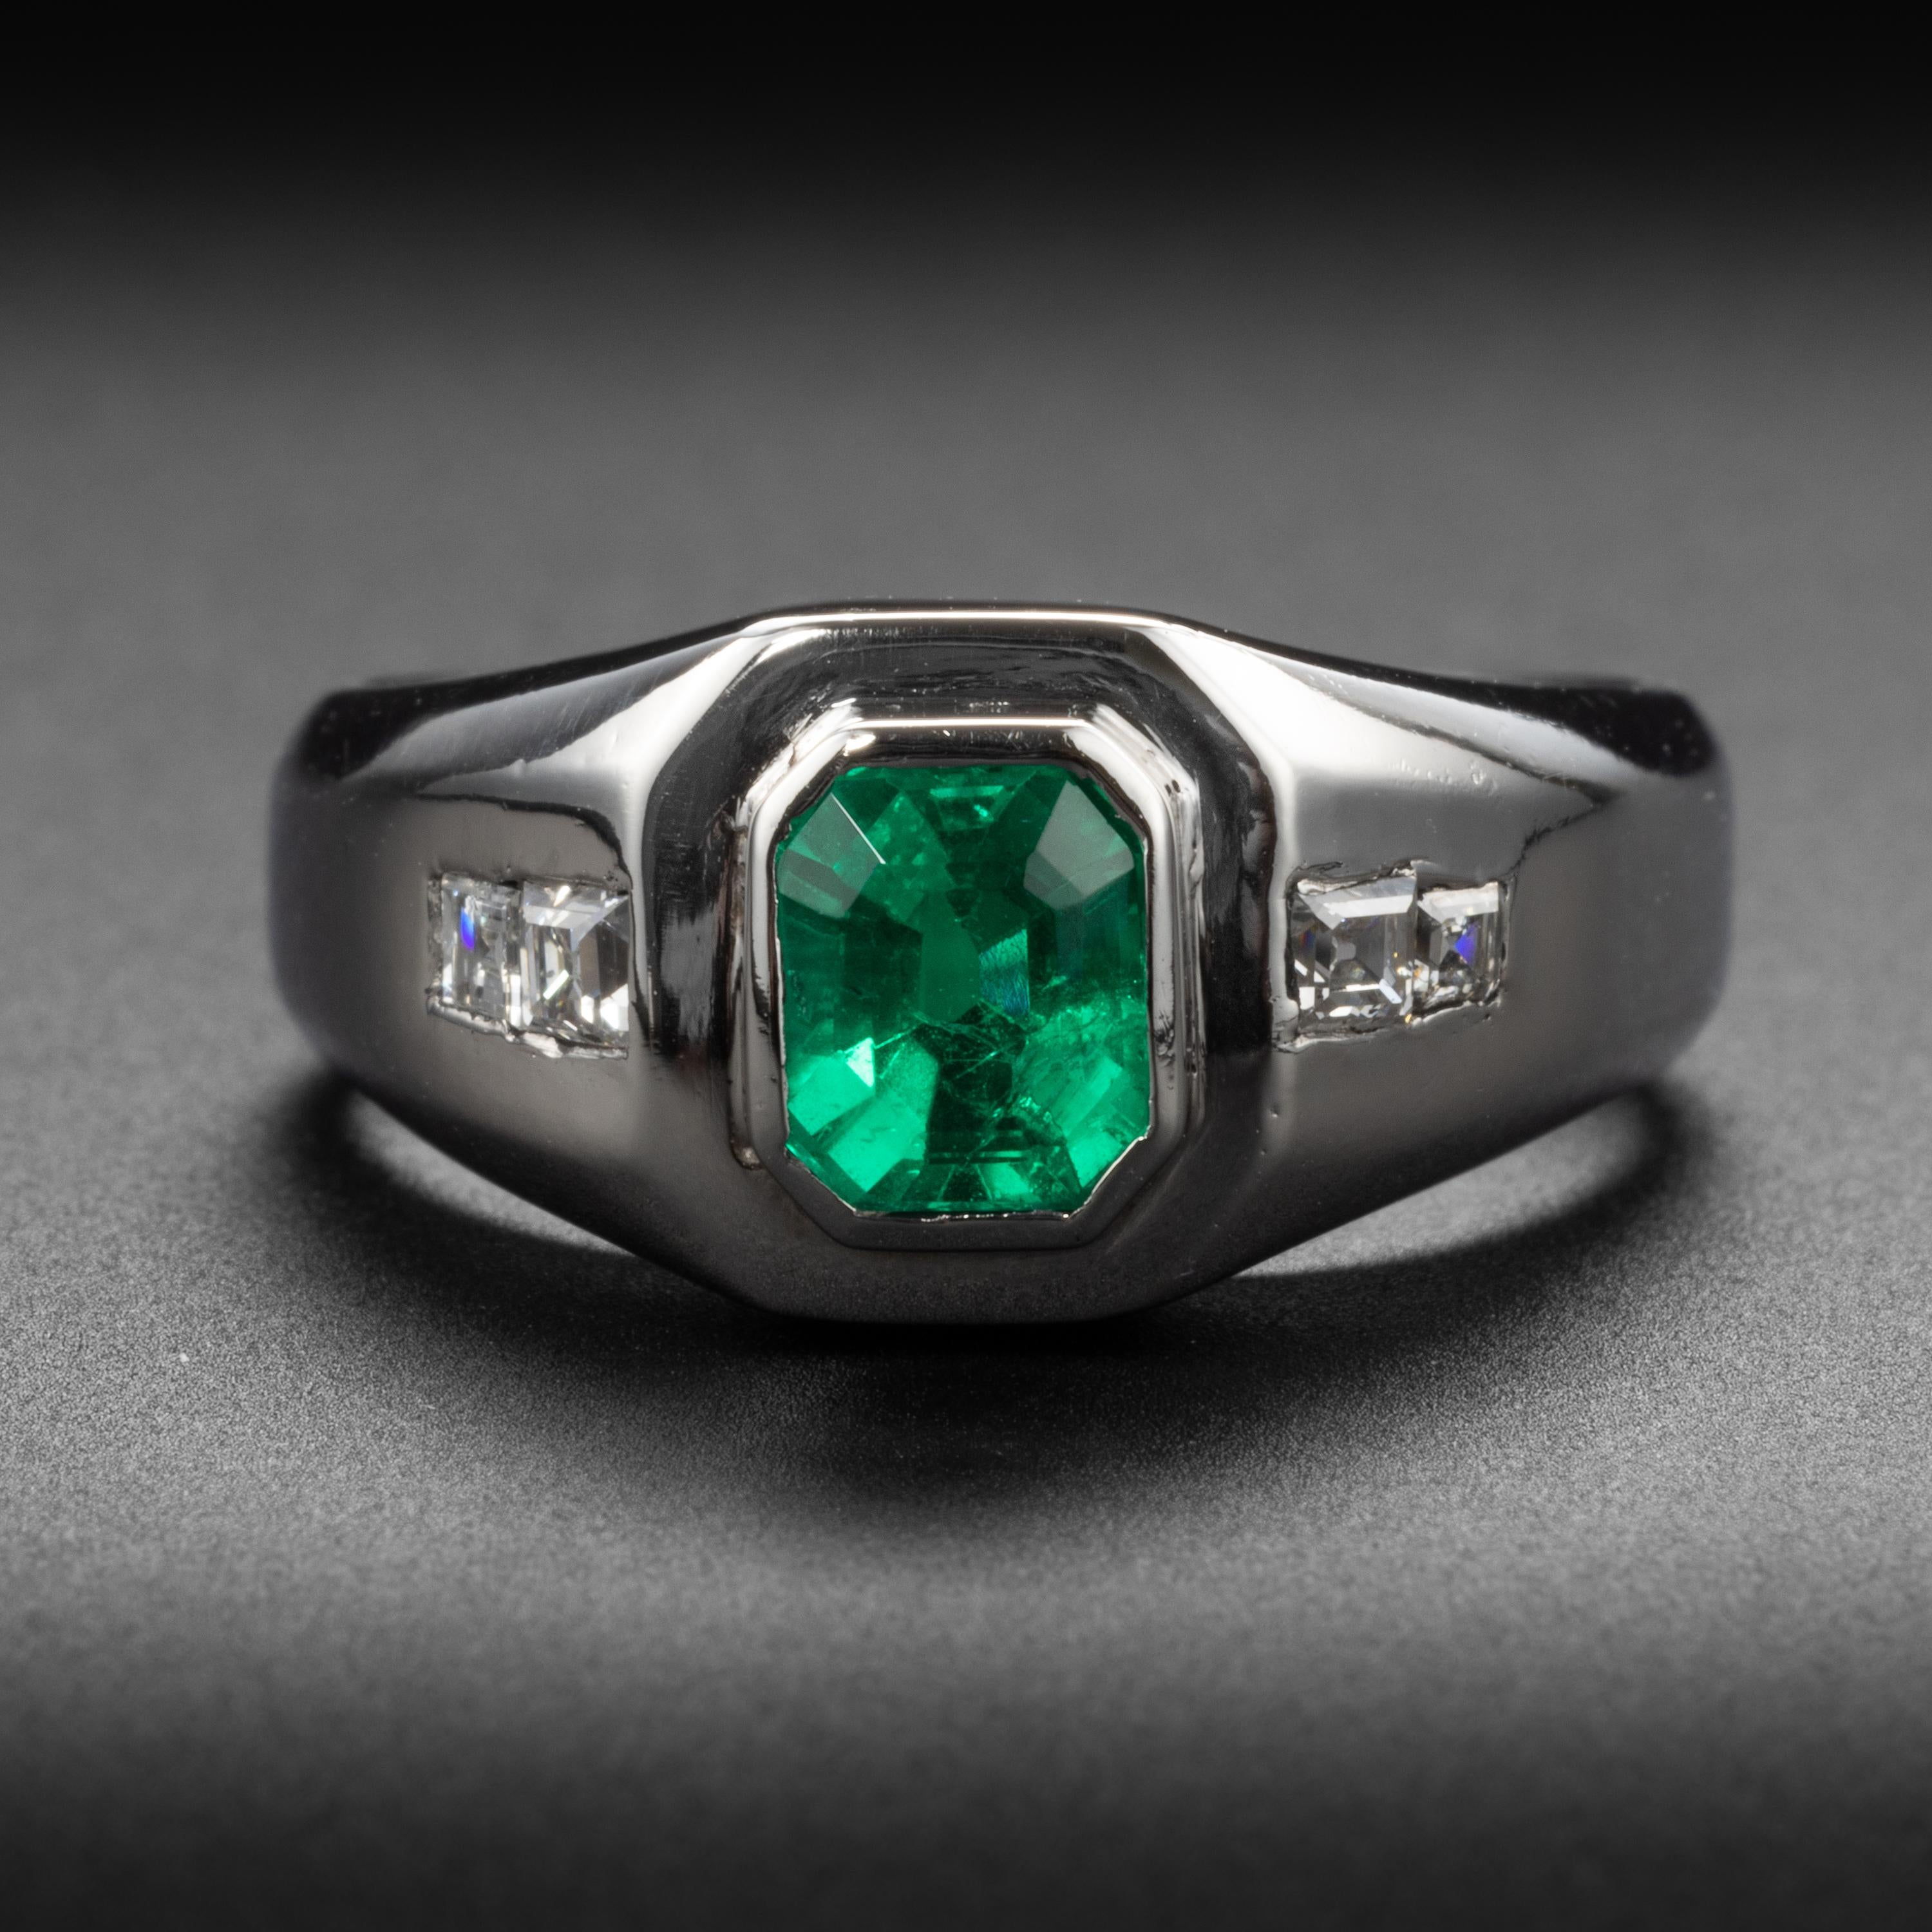 Emerald doesn't come any finer than what you see here in this vintage men's ring. This dense platinum hand-fabricated ring from the mid-1990s features a one-carat emerald-cut emerald of the finest color; a vividly saturated bluish-green that is